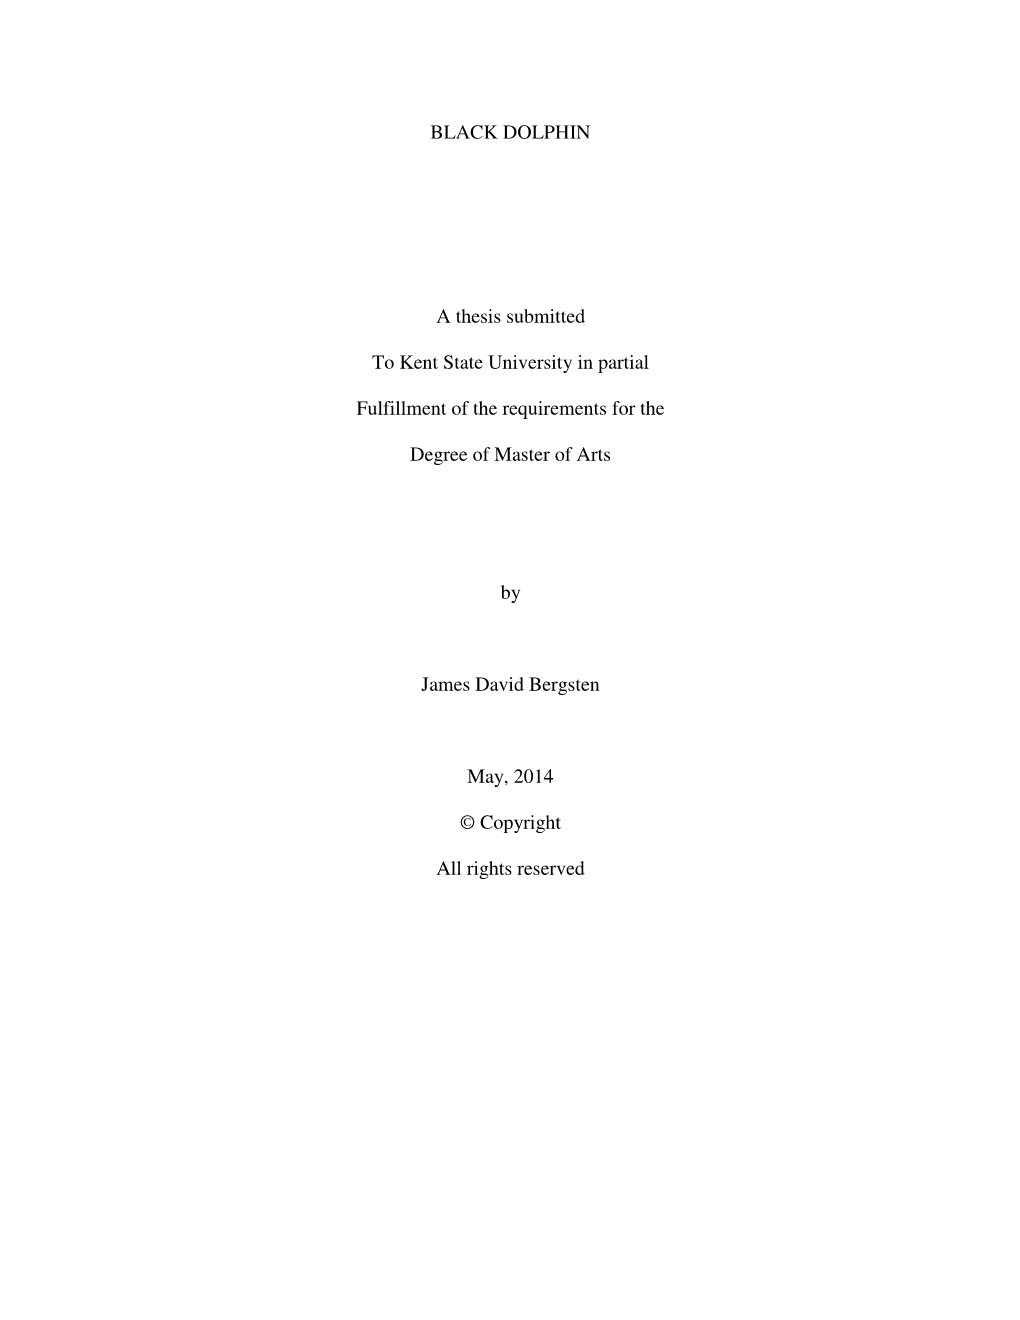 BLACK DOLPHIN a Thesis Submitted to Kent State University in Partial